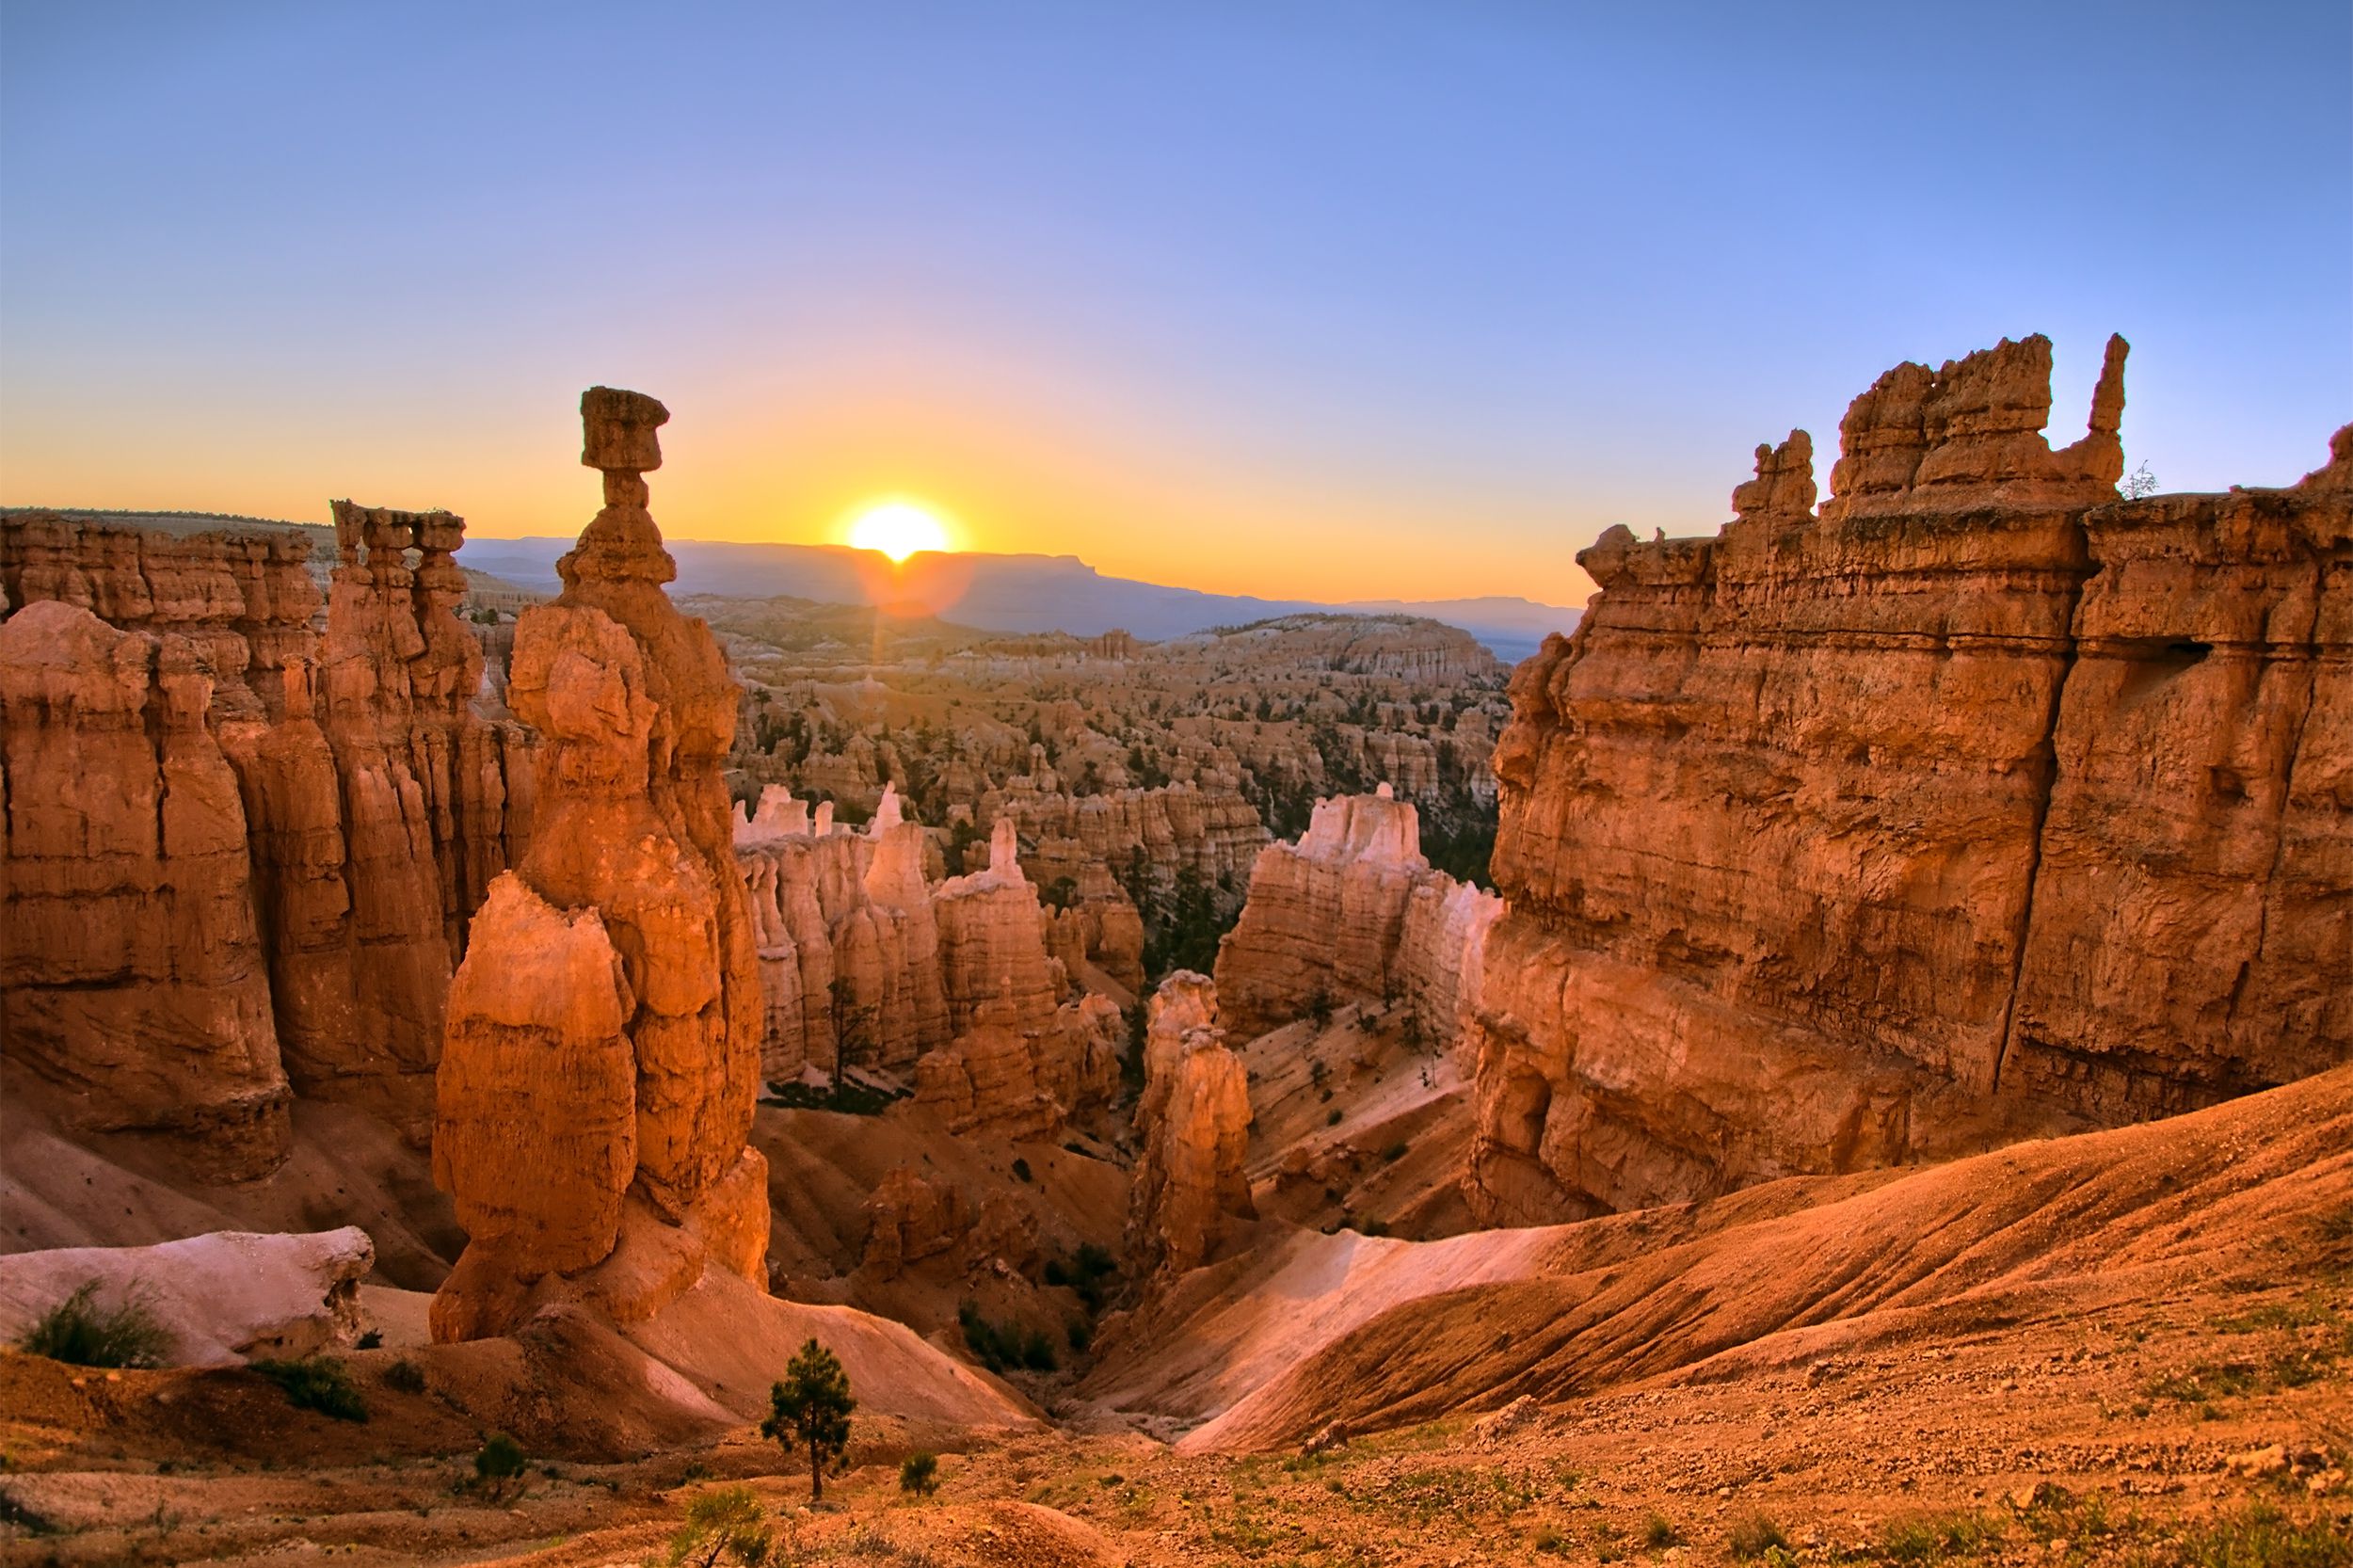 <p><a href="https://www.nps.gov/brca/index.htm">Bryce Canyon National Park</a> is home to the largest concentration of hoodoos (eroded columns of rock) anywhere on the planet. The unique and otherworldly landscape of this memorable park includes a variety of canyons, natural amphitheaters, and bowls carved along the edge of a high plateau. </p>